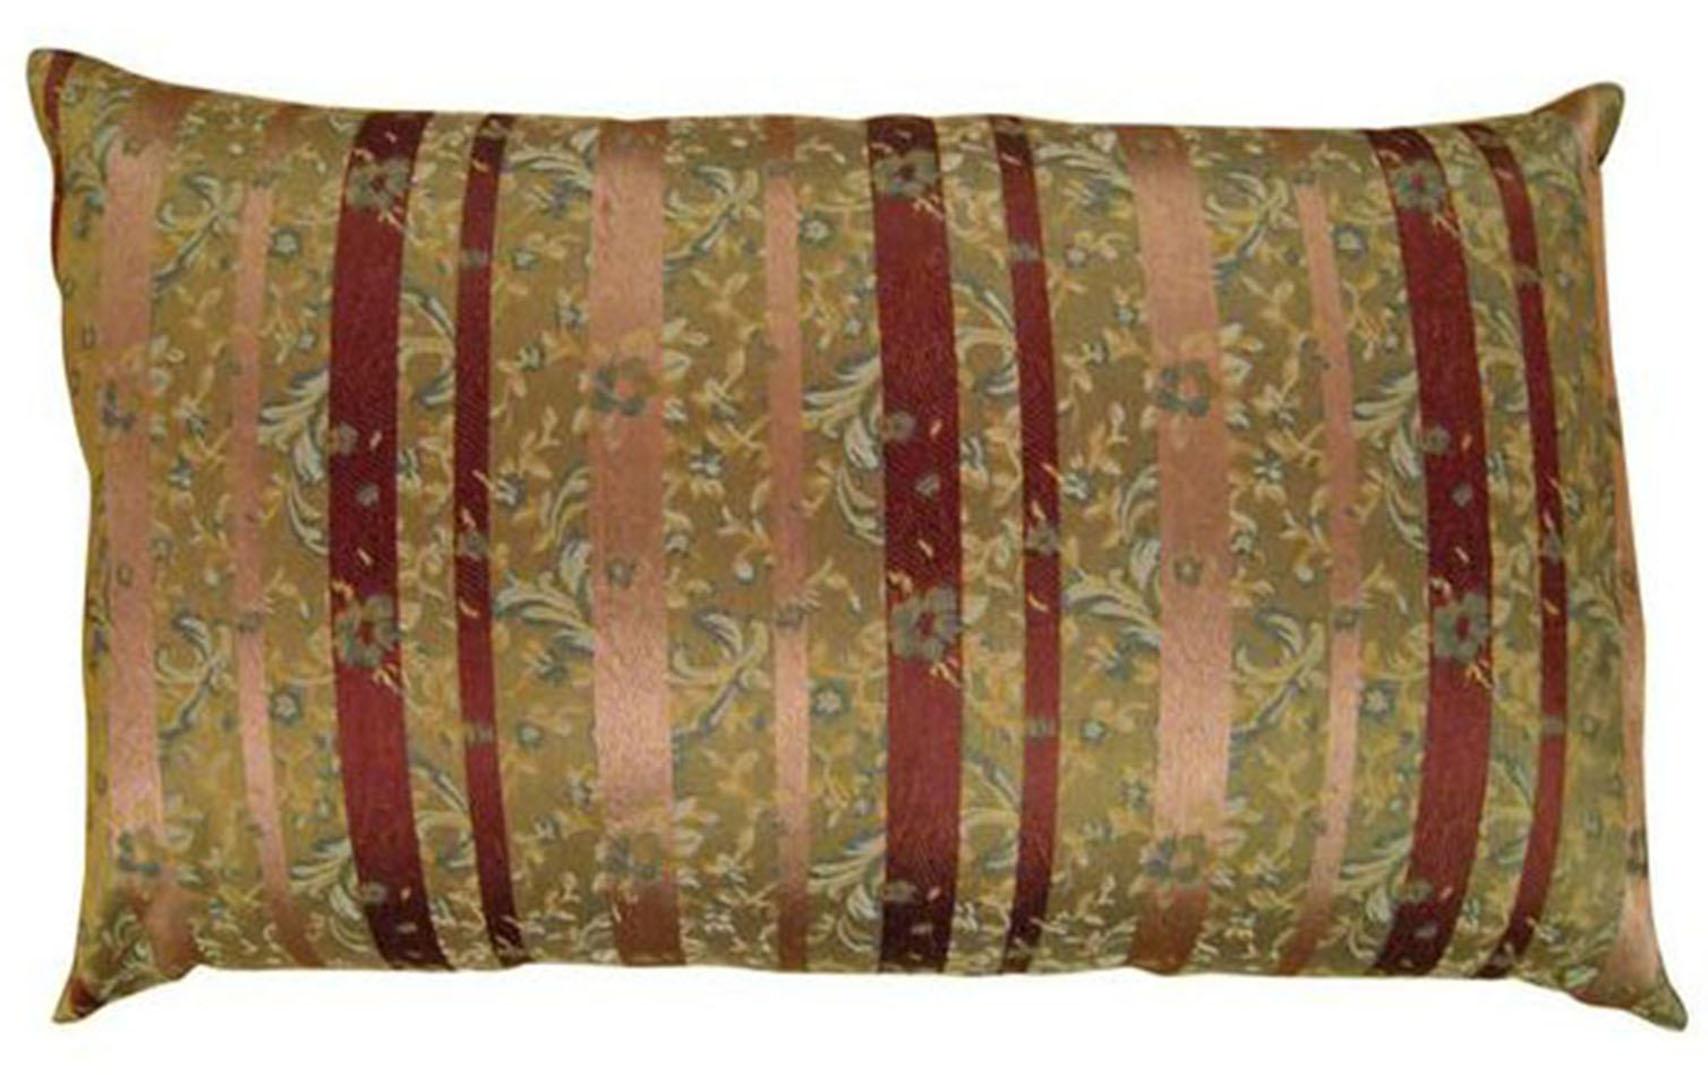 Pair of Large Decorative Satin Pillows w/ Vintage Striped Brocade on Both Sides For Sale 1